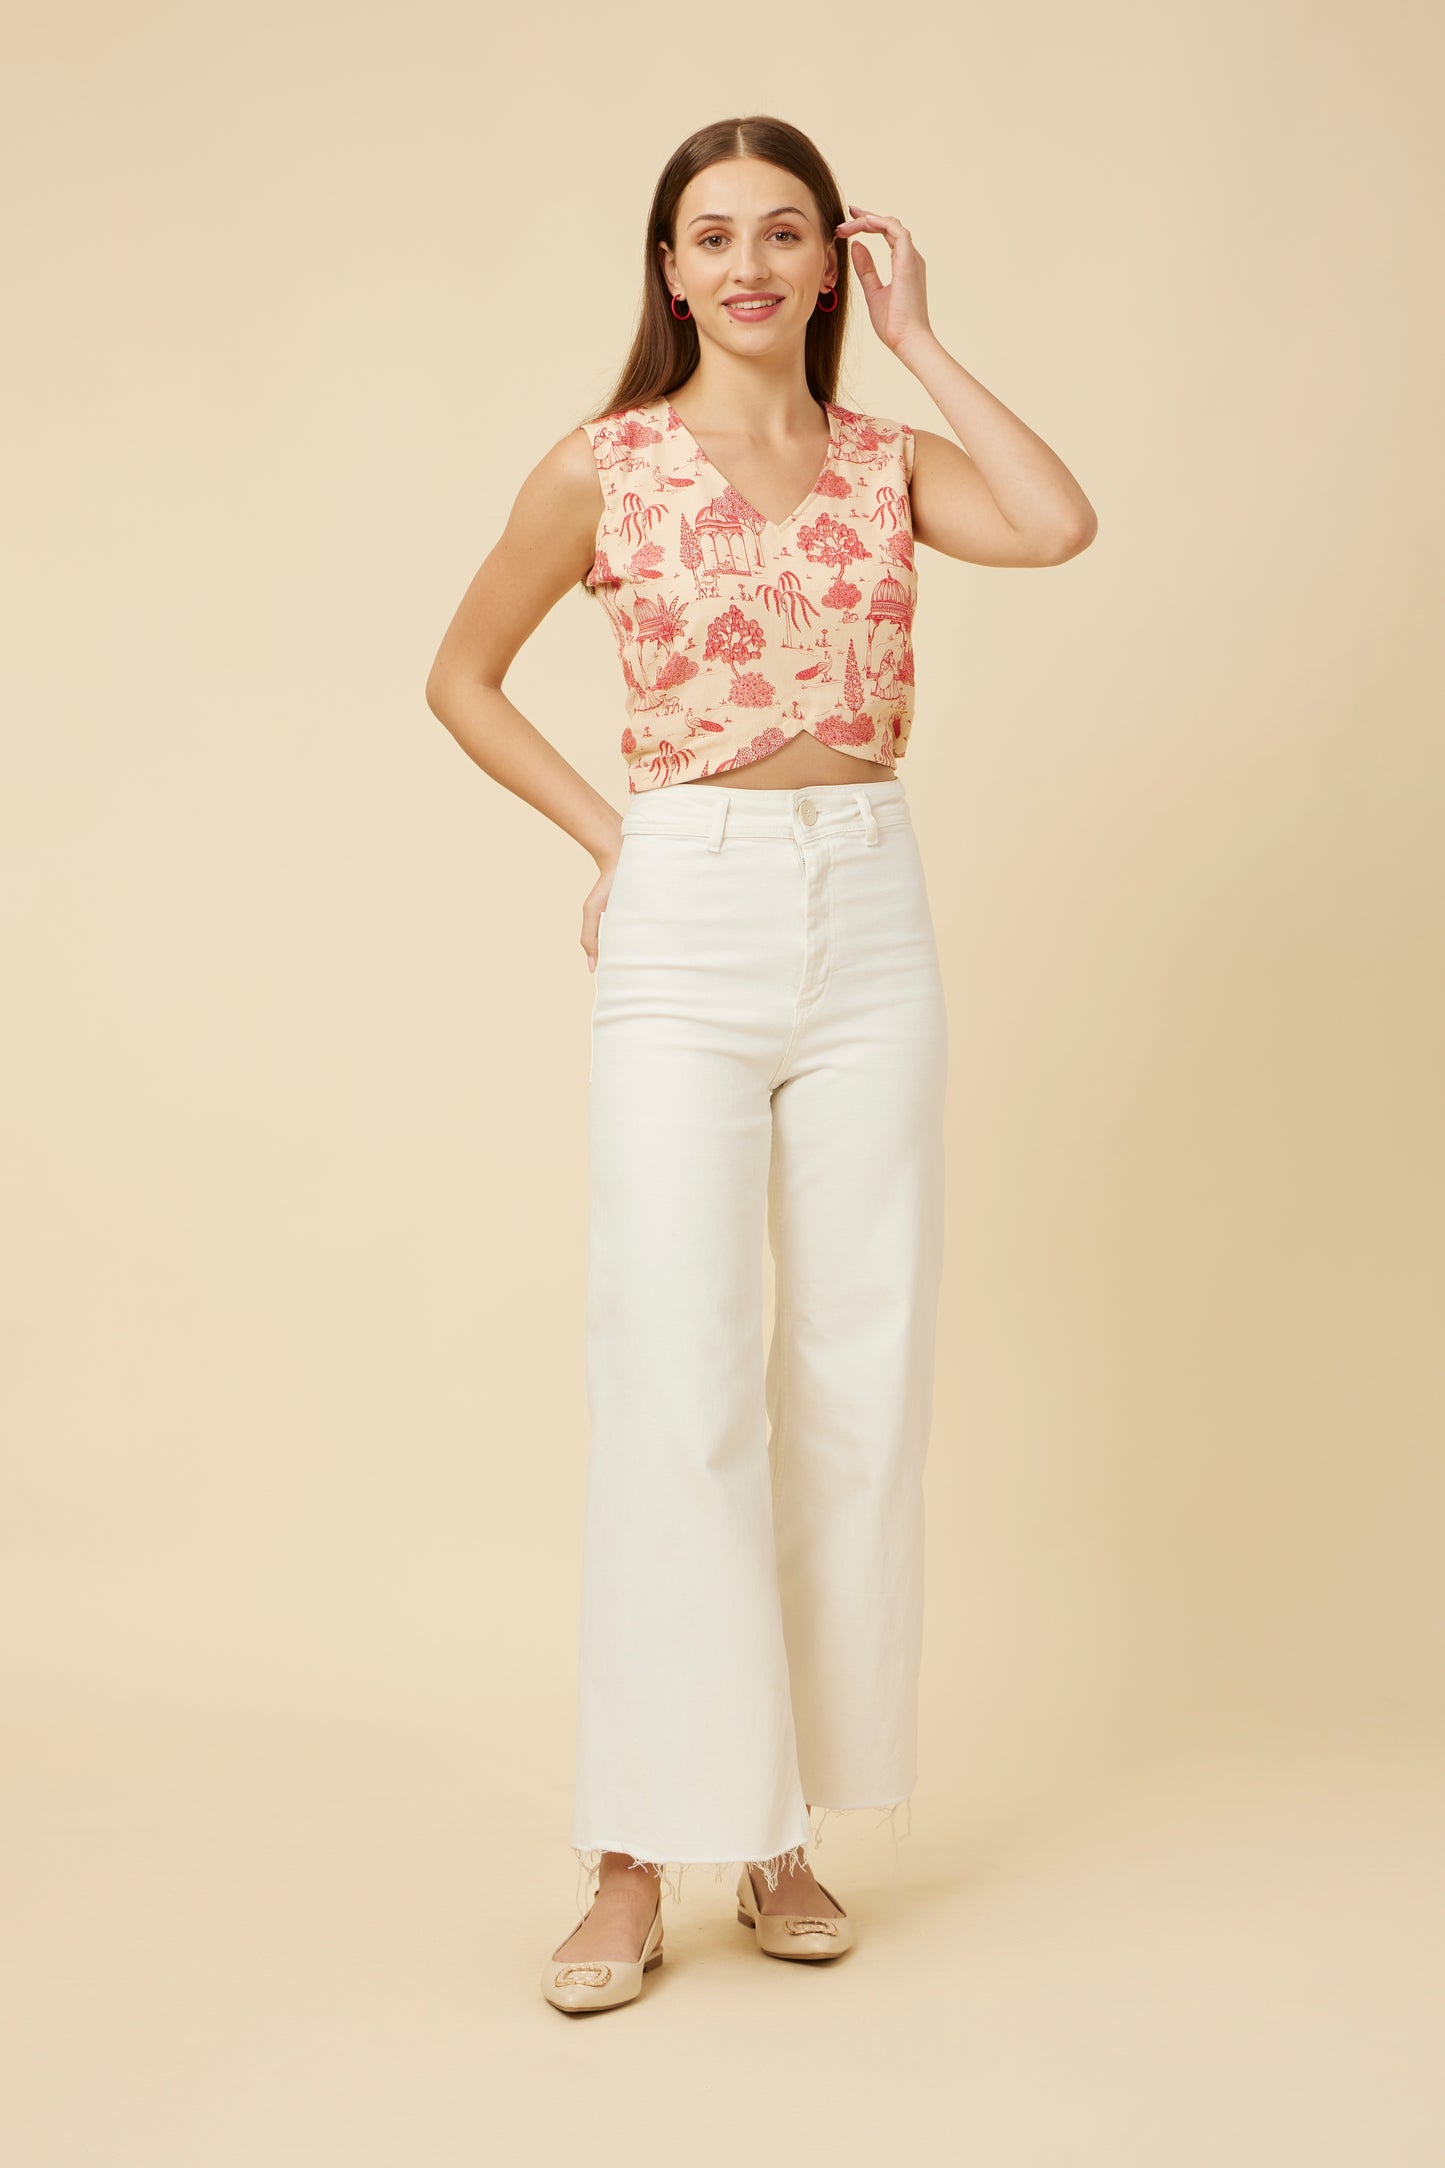 Frontal view of the model in the 'Jaipur Rani' sleeveless crop top, paired with white pants, highlighting the V-neck and intricate Jaipur print